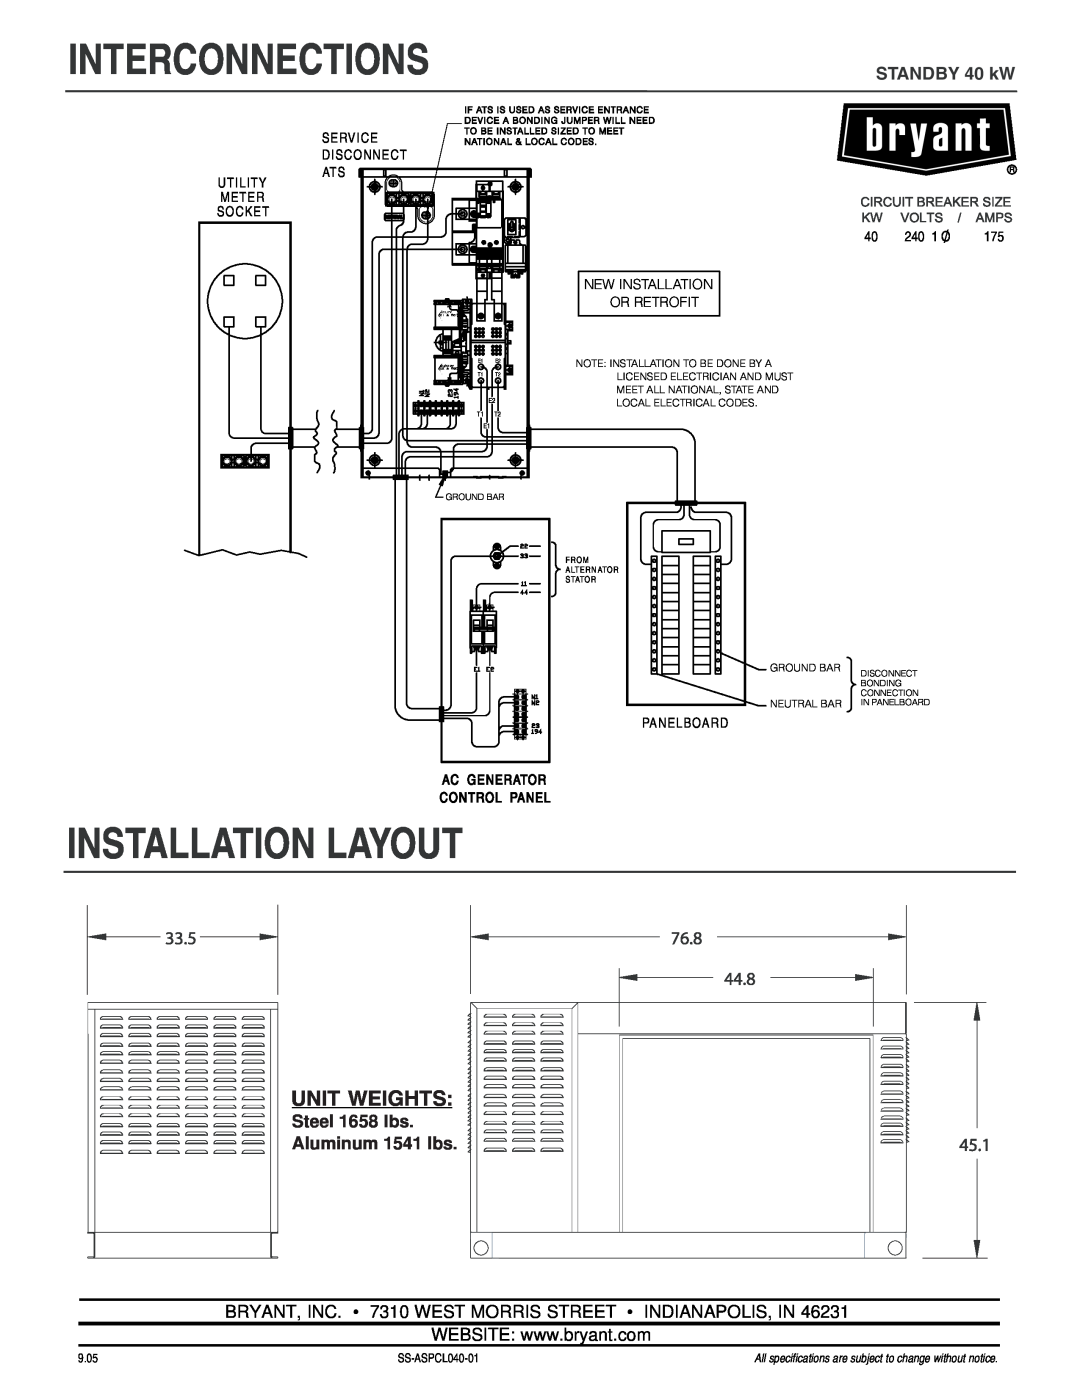 Bryant ASPCS1BBL040 Interconnections, Installation Layout, Unit Weights, STANDBY 40 kW, Steel 1658 lbs Aluminum 1541 lbs 